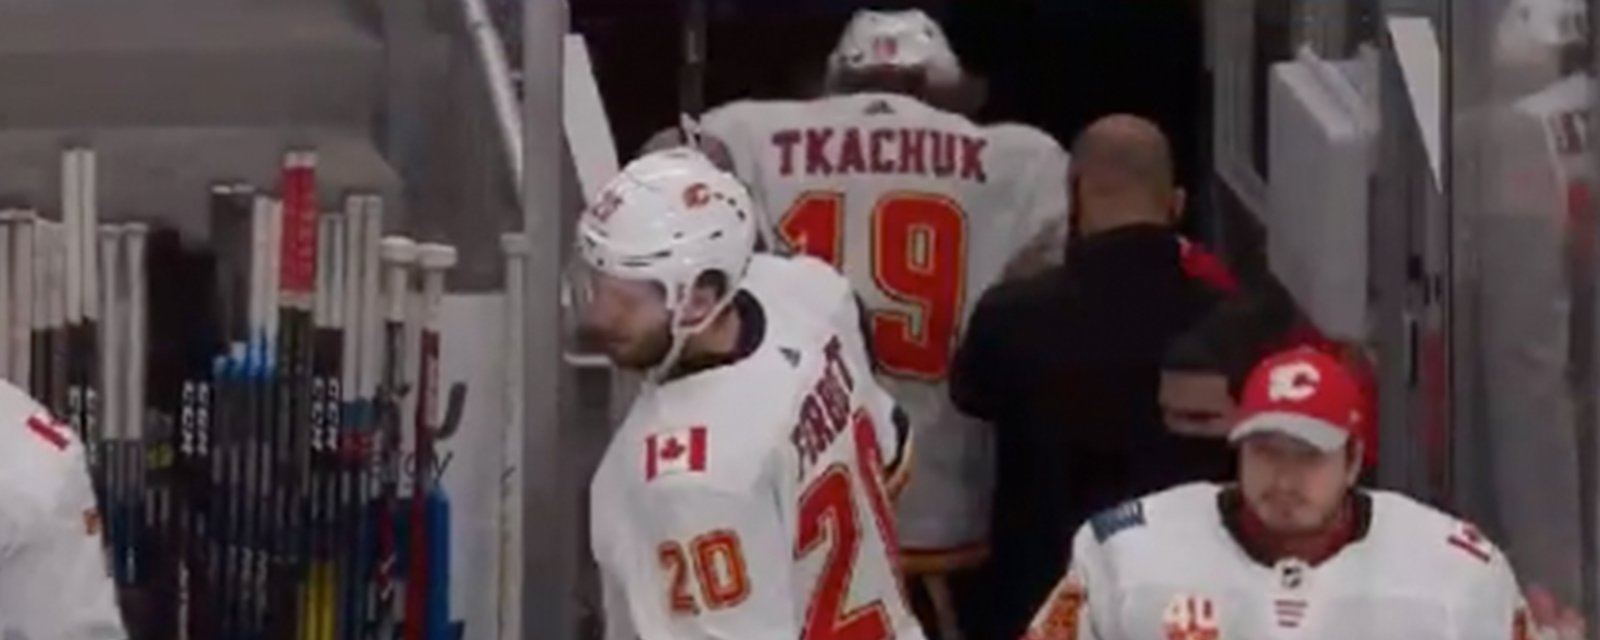 Tkachuk injured in Game 2 and it does NOT look good